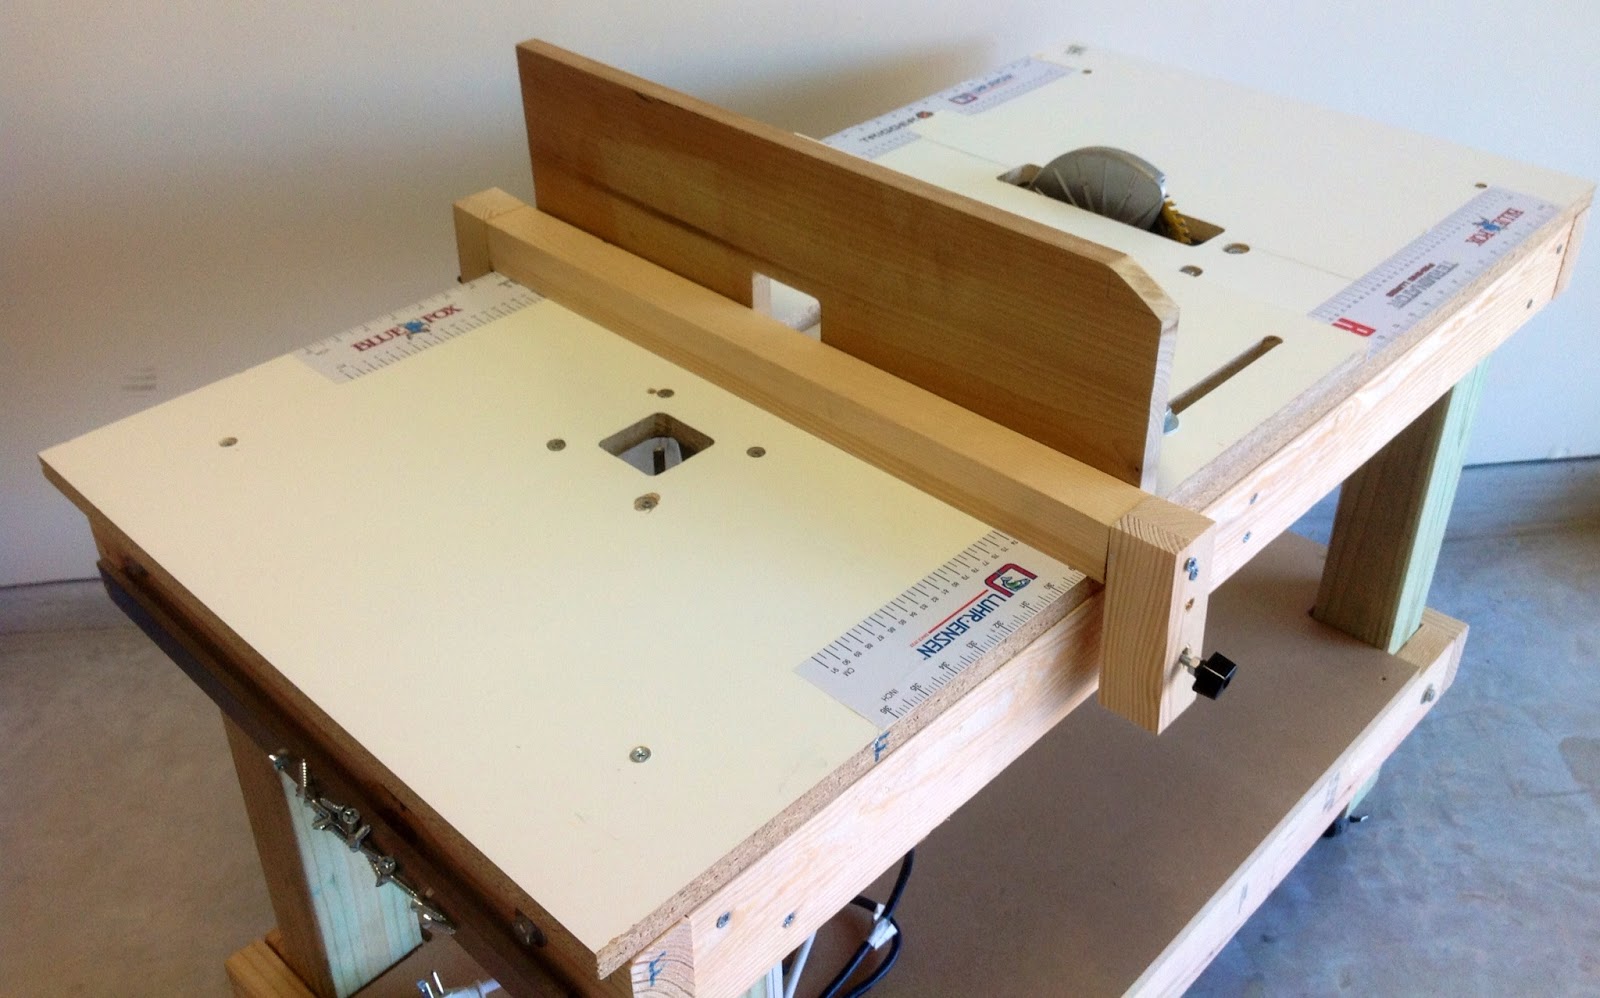 Thinking Wood: Project 2 - DIY Portable 3-in-1 Workbench 